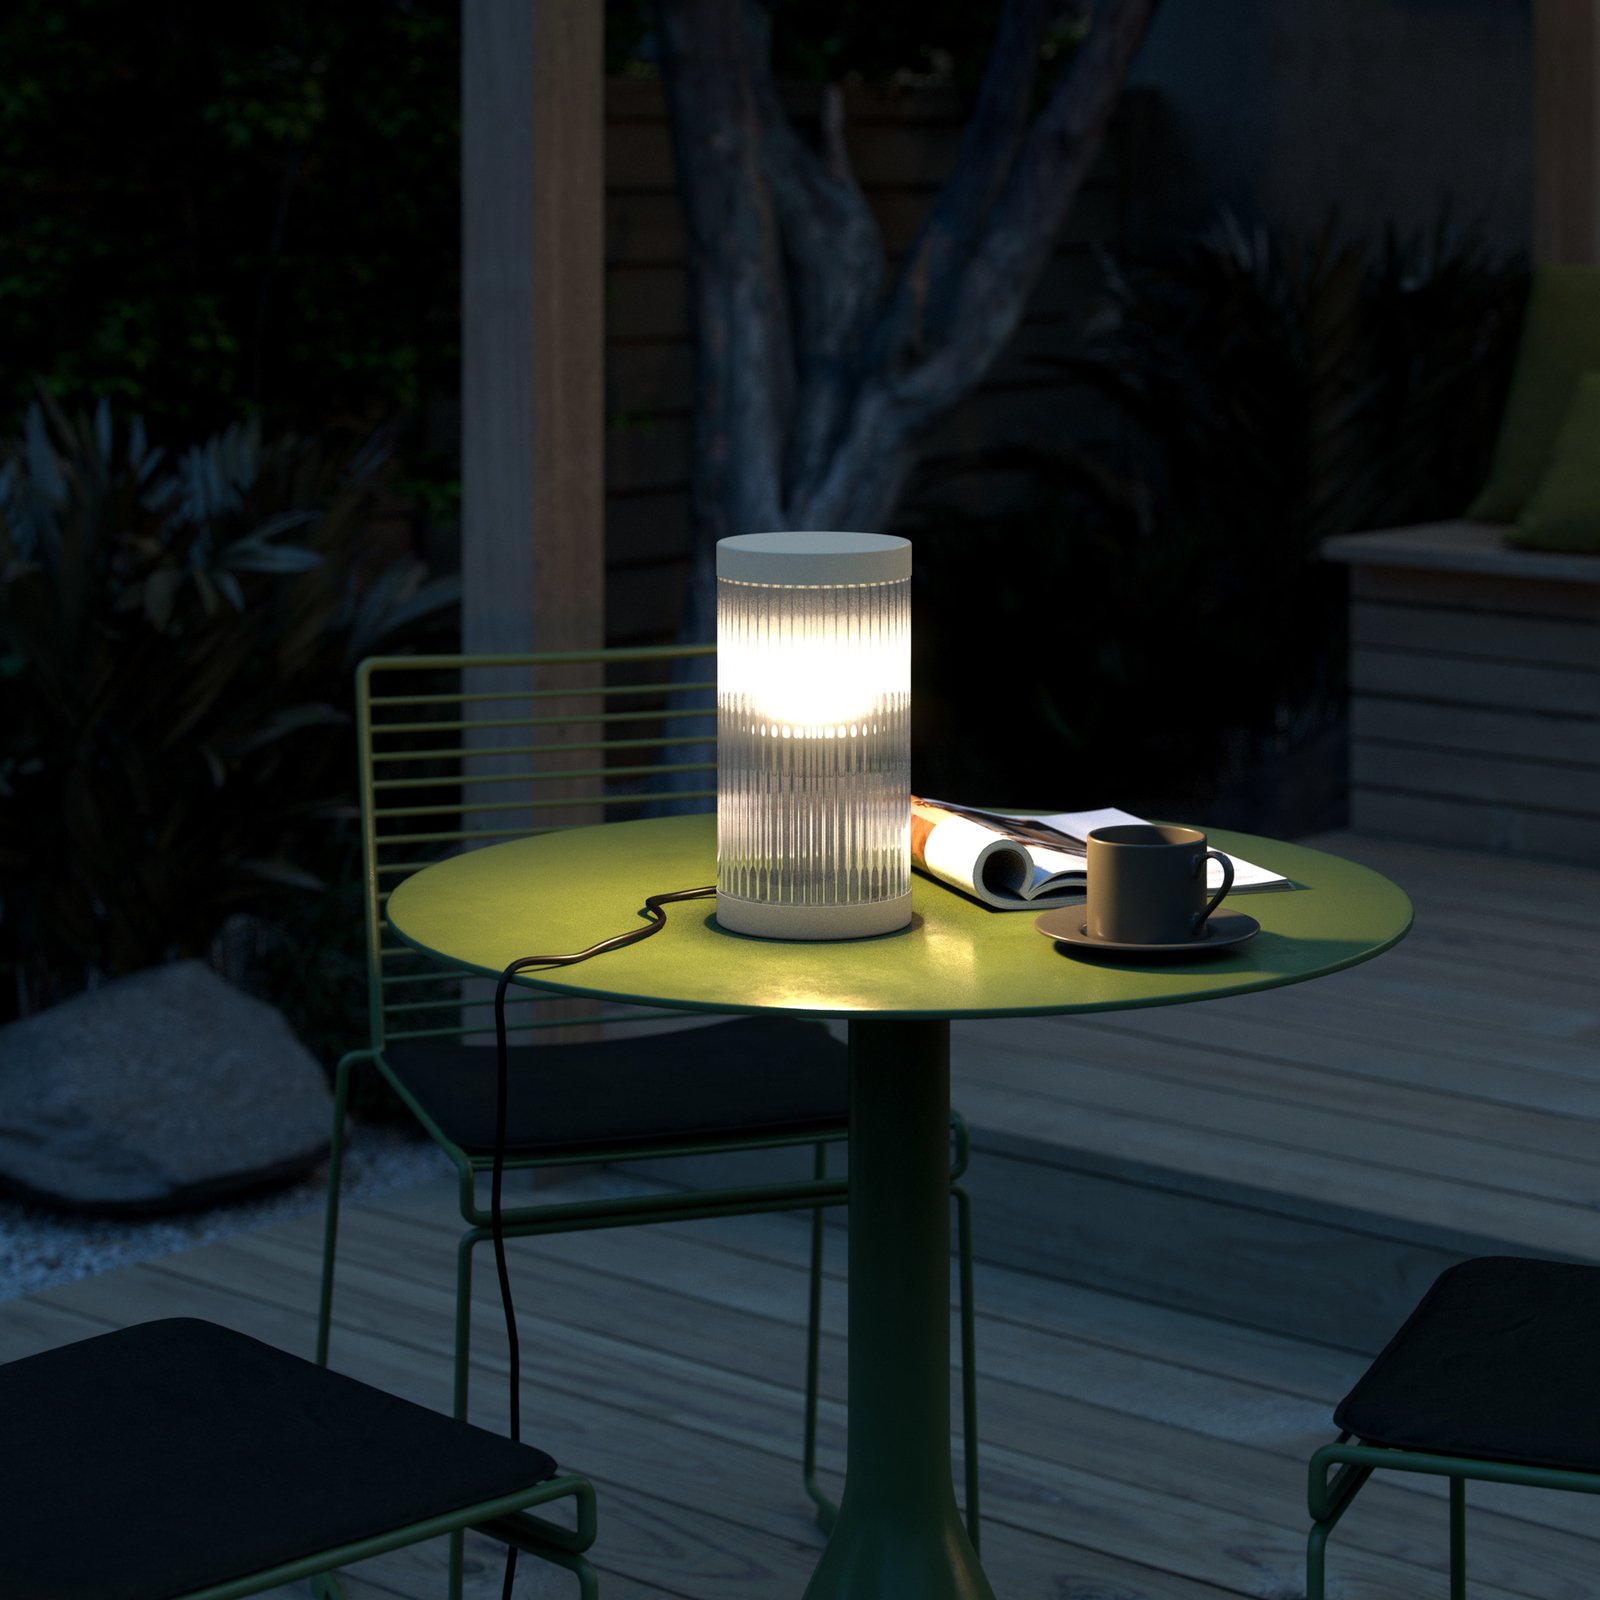 Coupar table lamp for outdoor use, sand